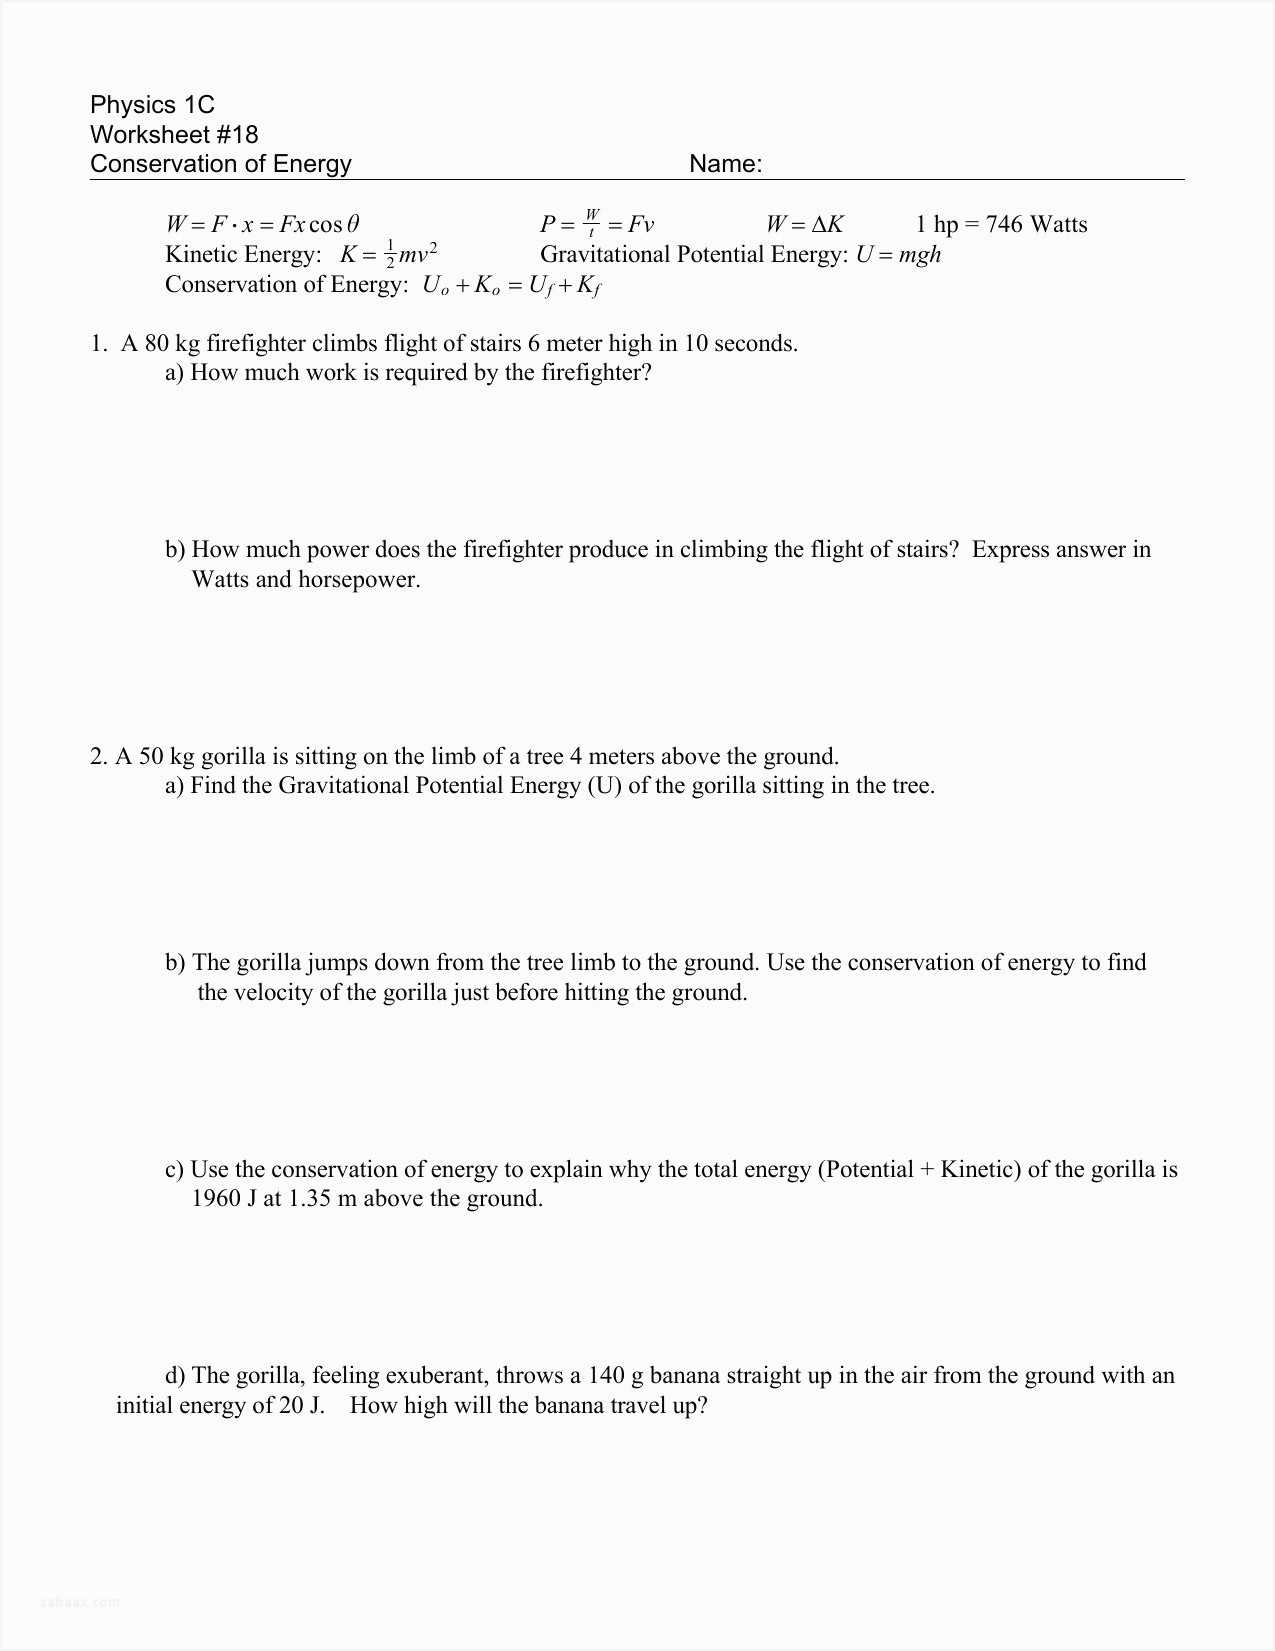 Conduction Convection or Radiation Worksheet Answers Also Energy Transfer In the atmosphere Worksheet Answers Unique thermal